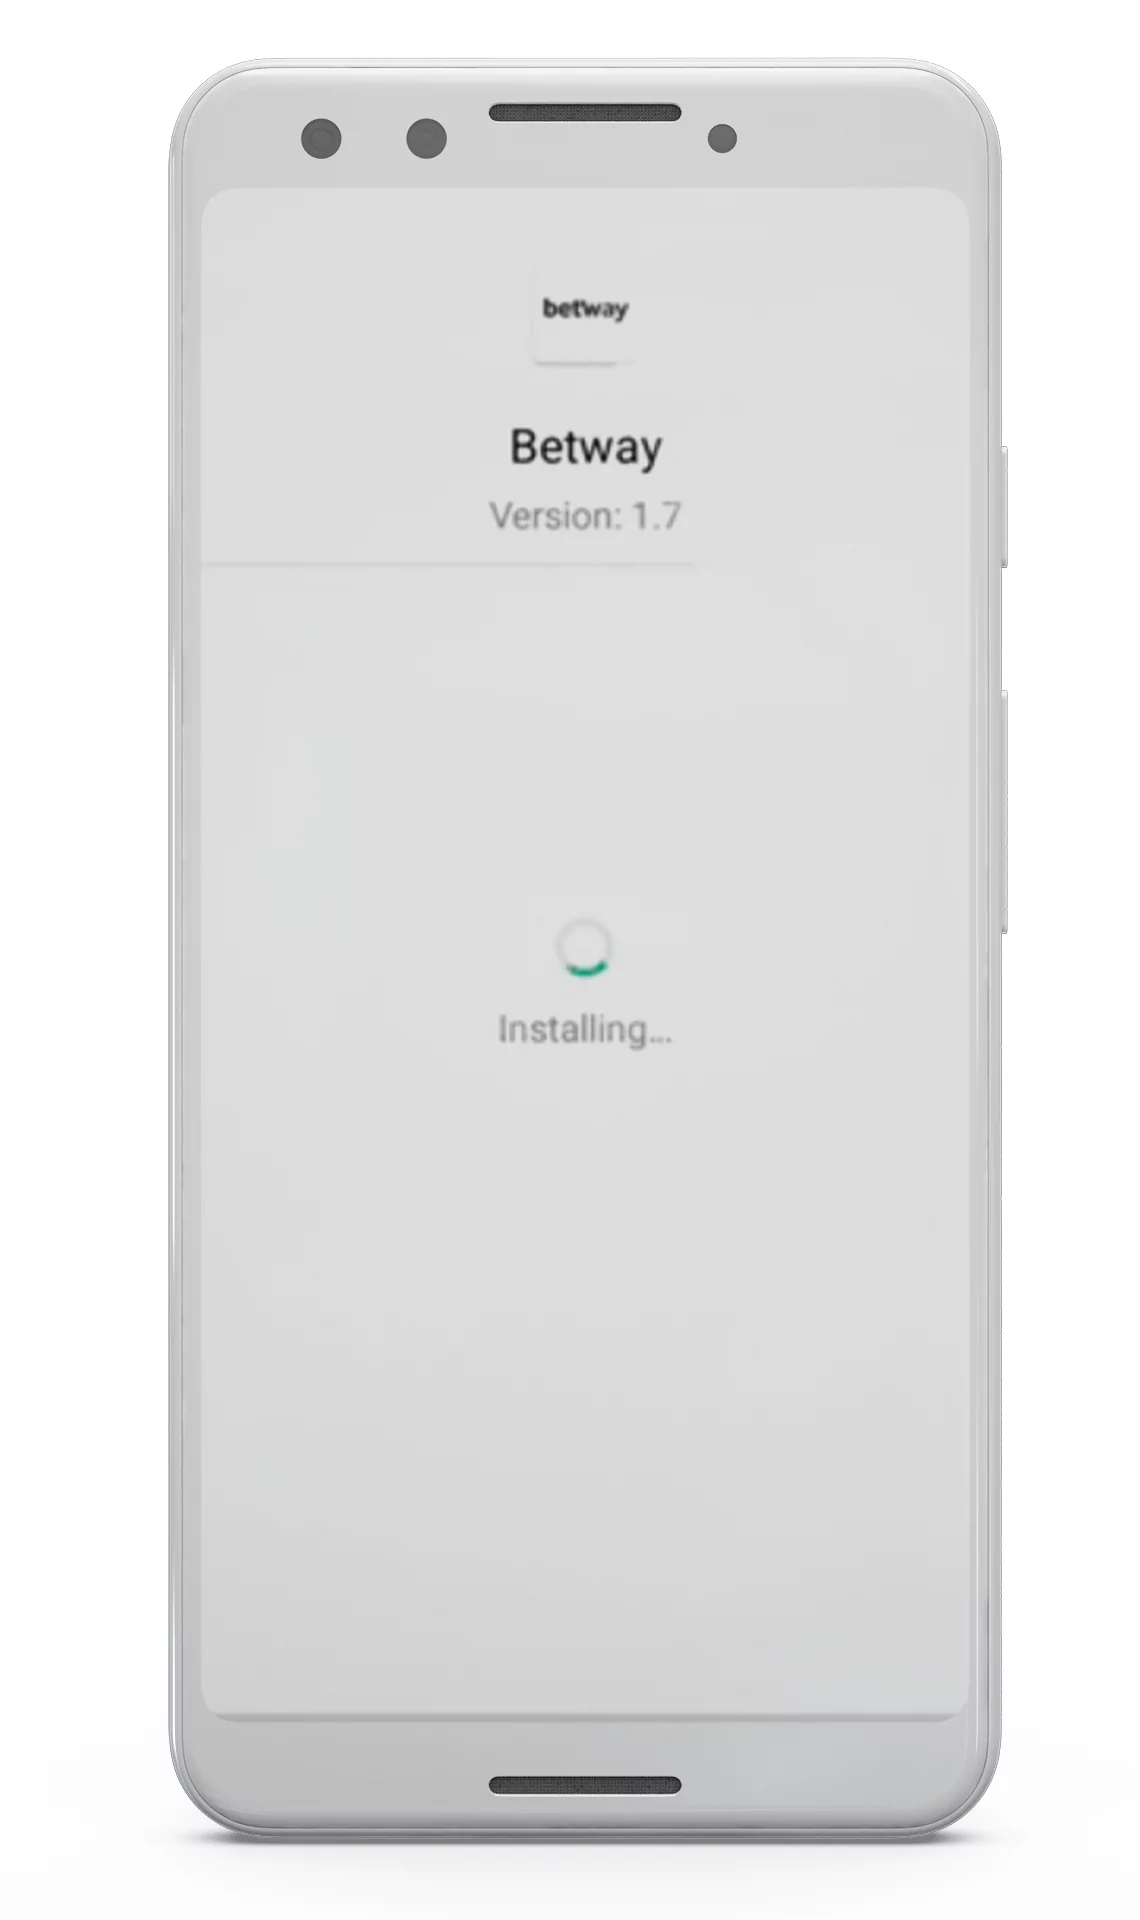 Now you can sign up for Betway app via your mobile phone.